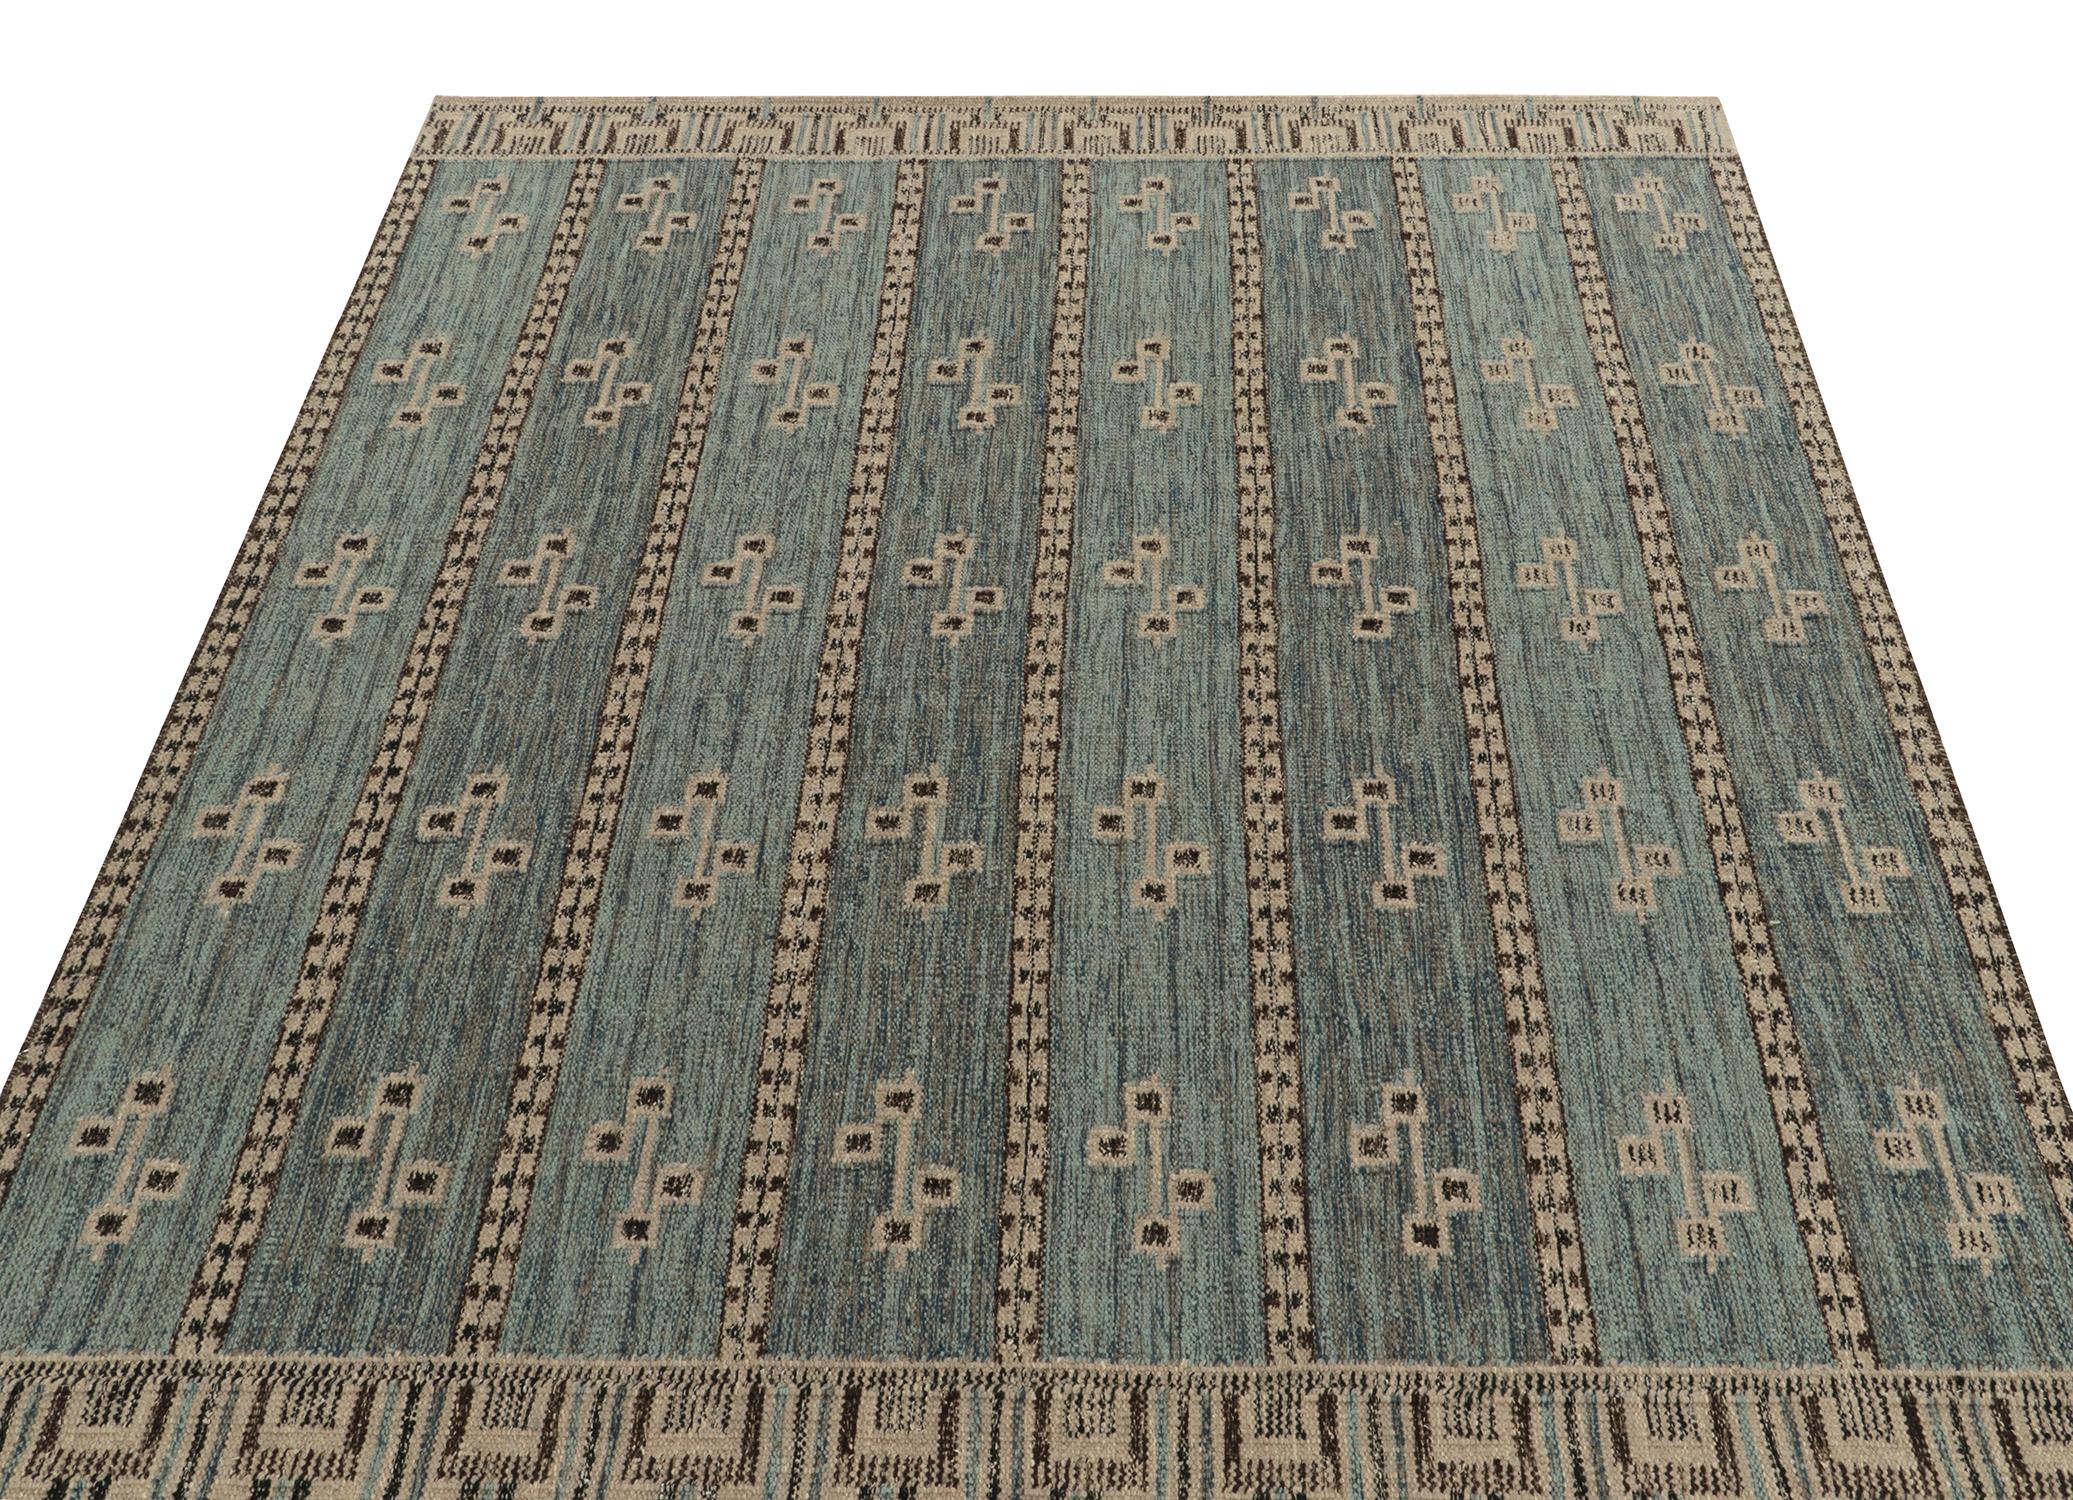 An elegant custom flat weave from Rug & Kilim’s Scandinavian Kilim Collection. Exemplified in this prior 8x10 edition, this kilim design possesses exemplary textural sensibility that perfectly integrates with the uniform geometric pattern sitting